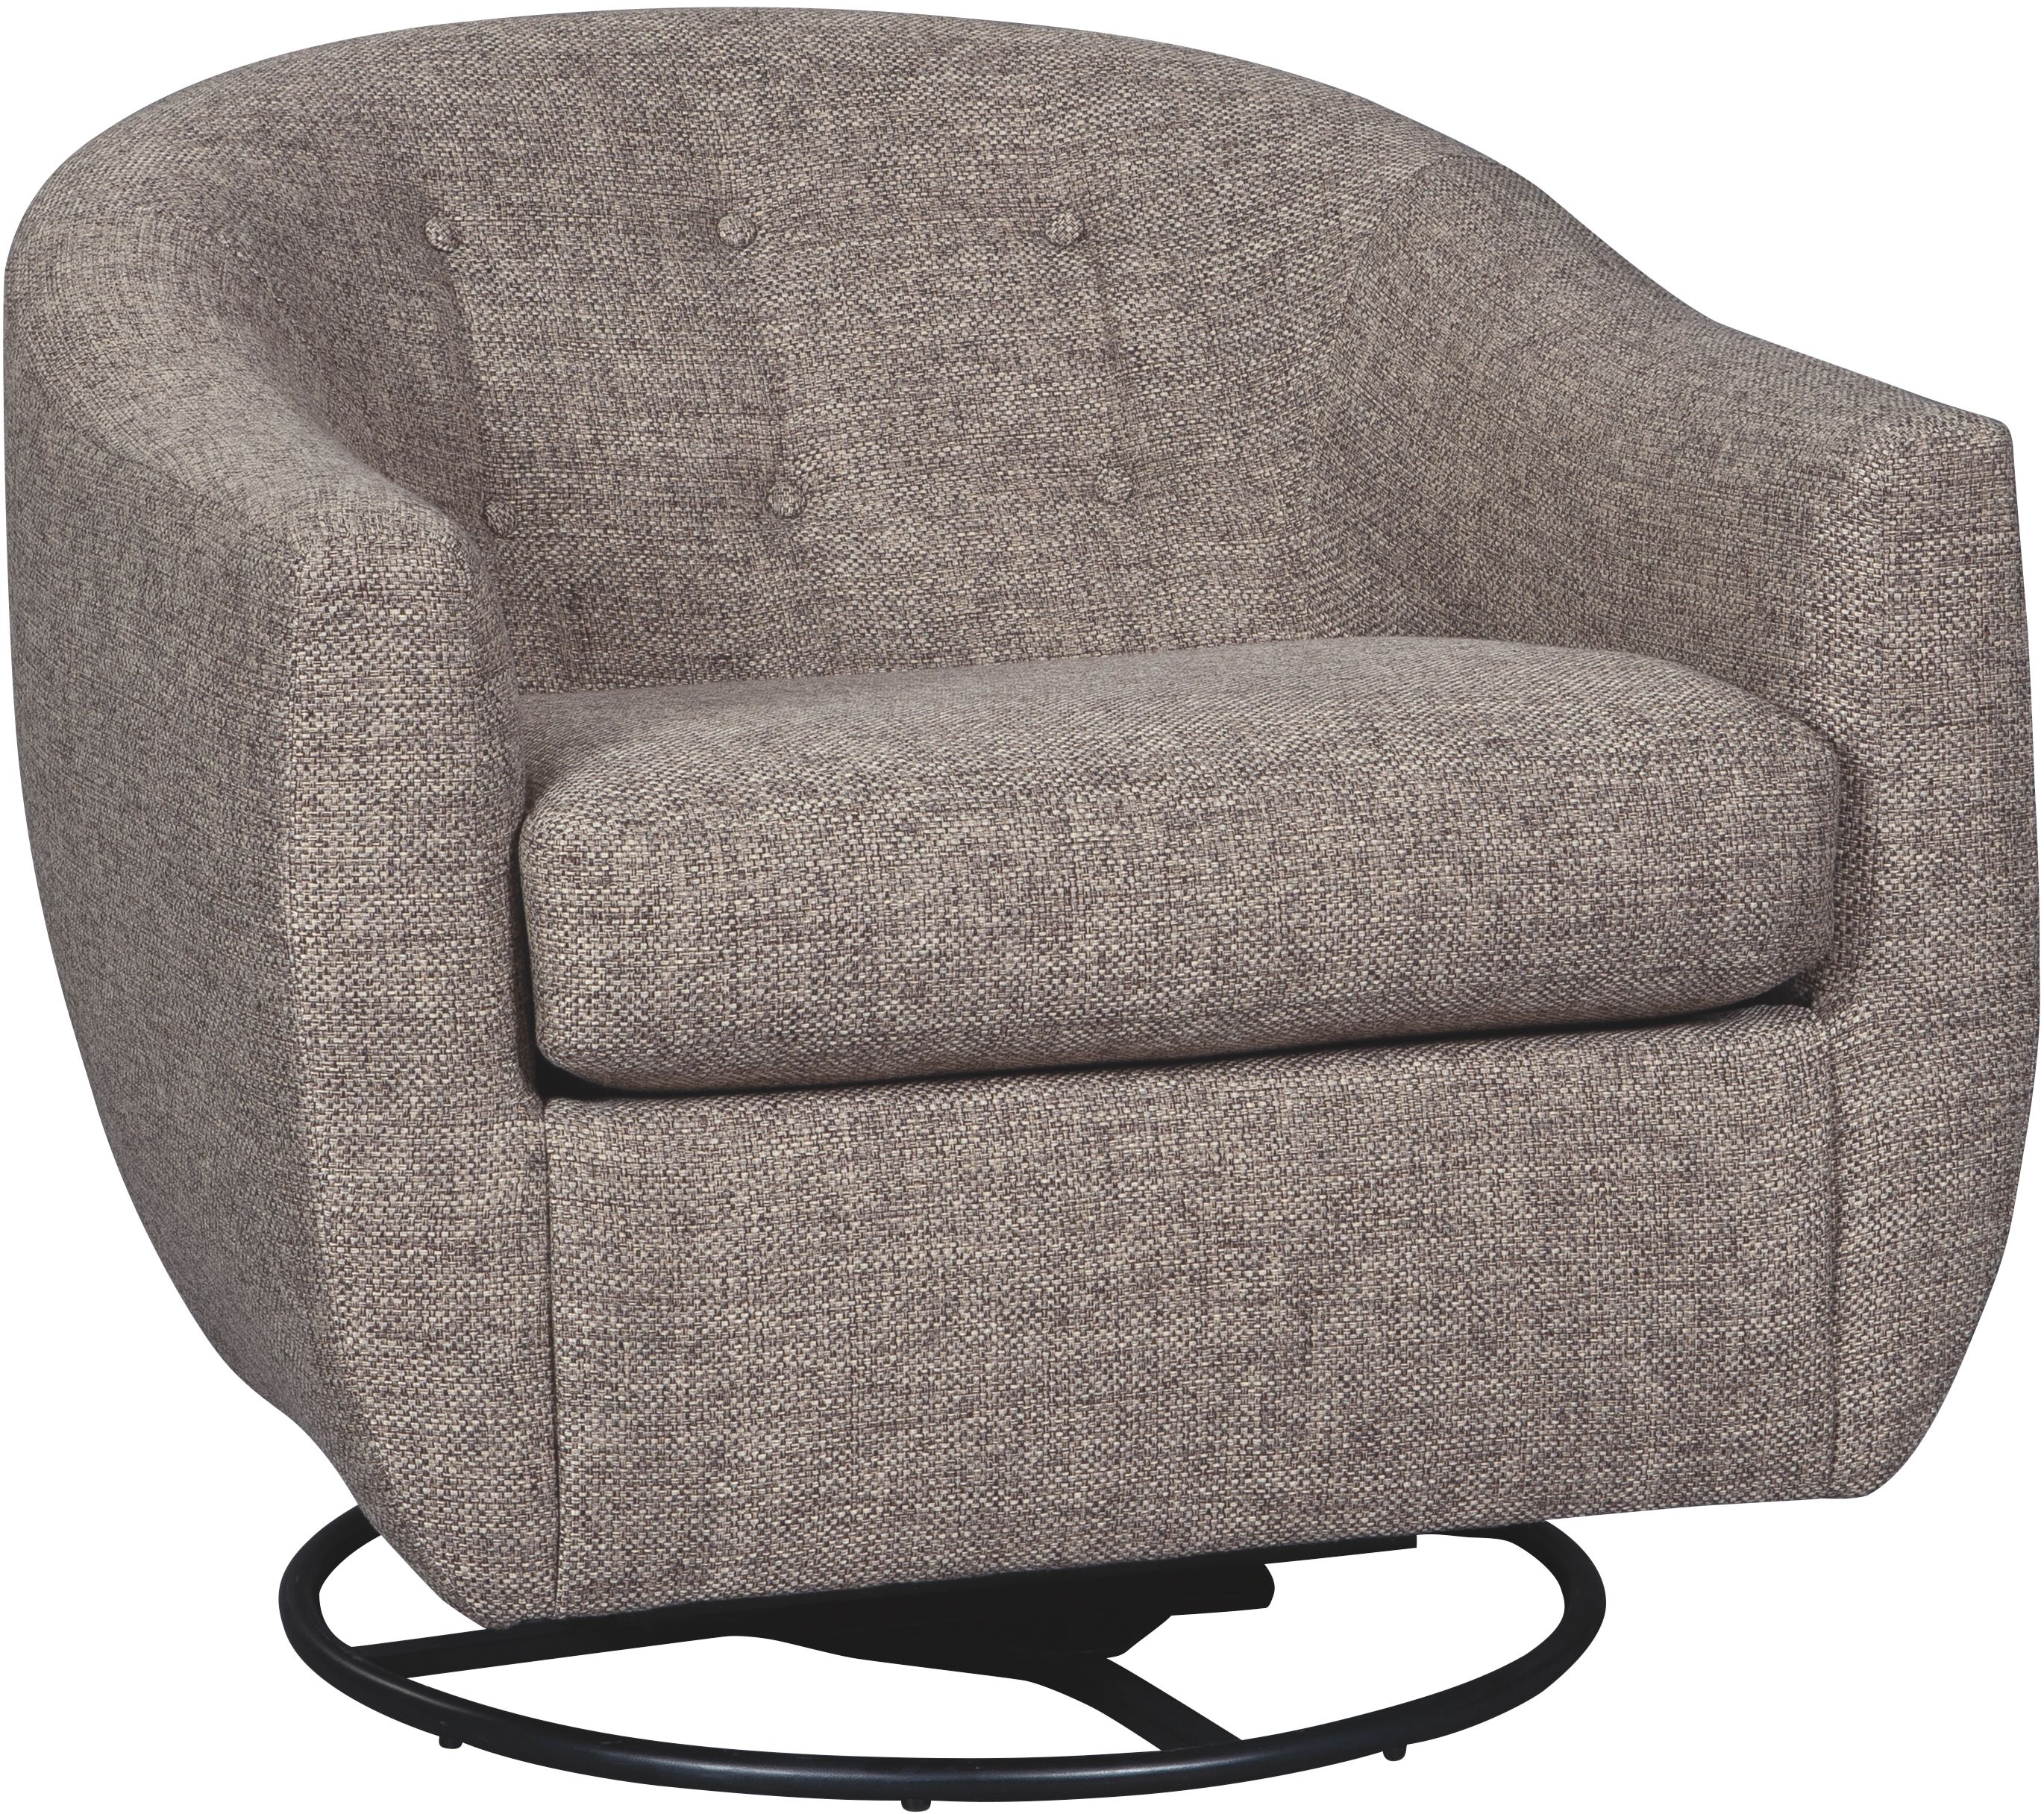 Signature Design by Ashley® Upshur Taupe Swivel Glider Accent Chair